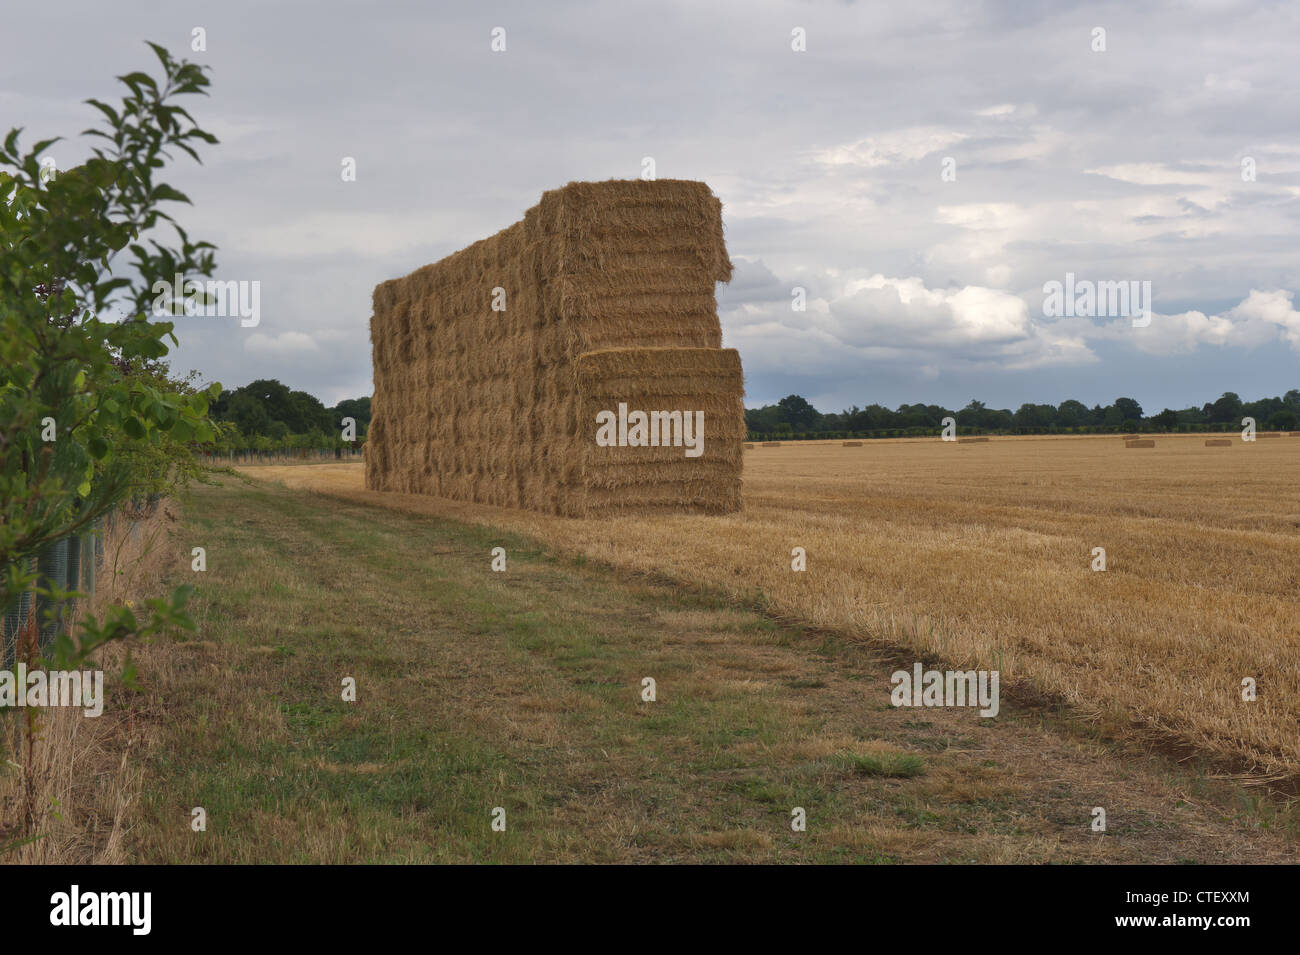 Large haystack in a field Stock Photo